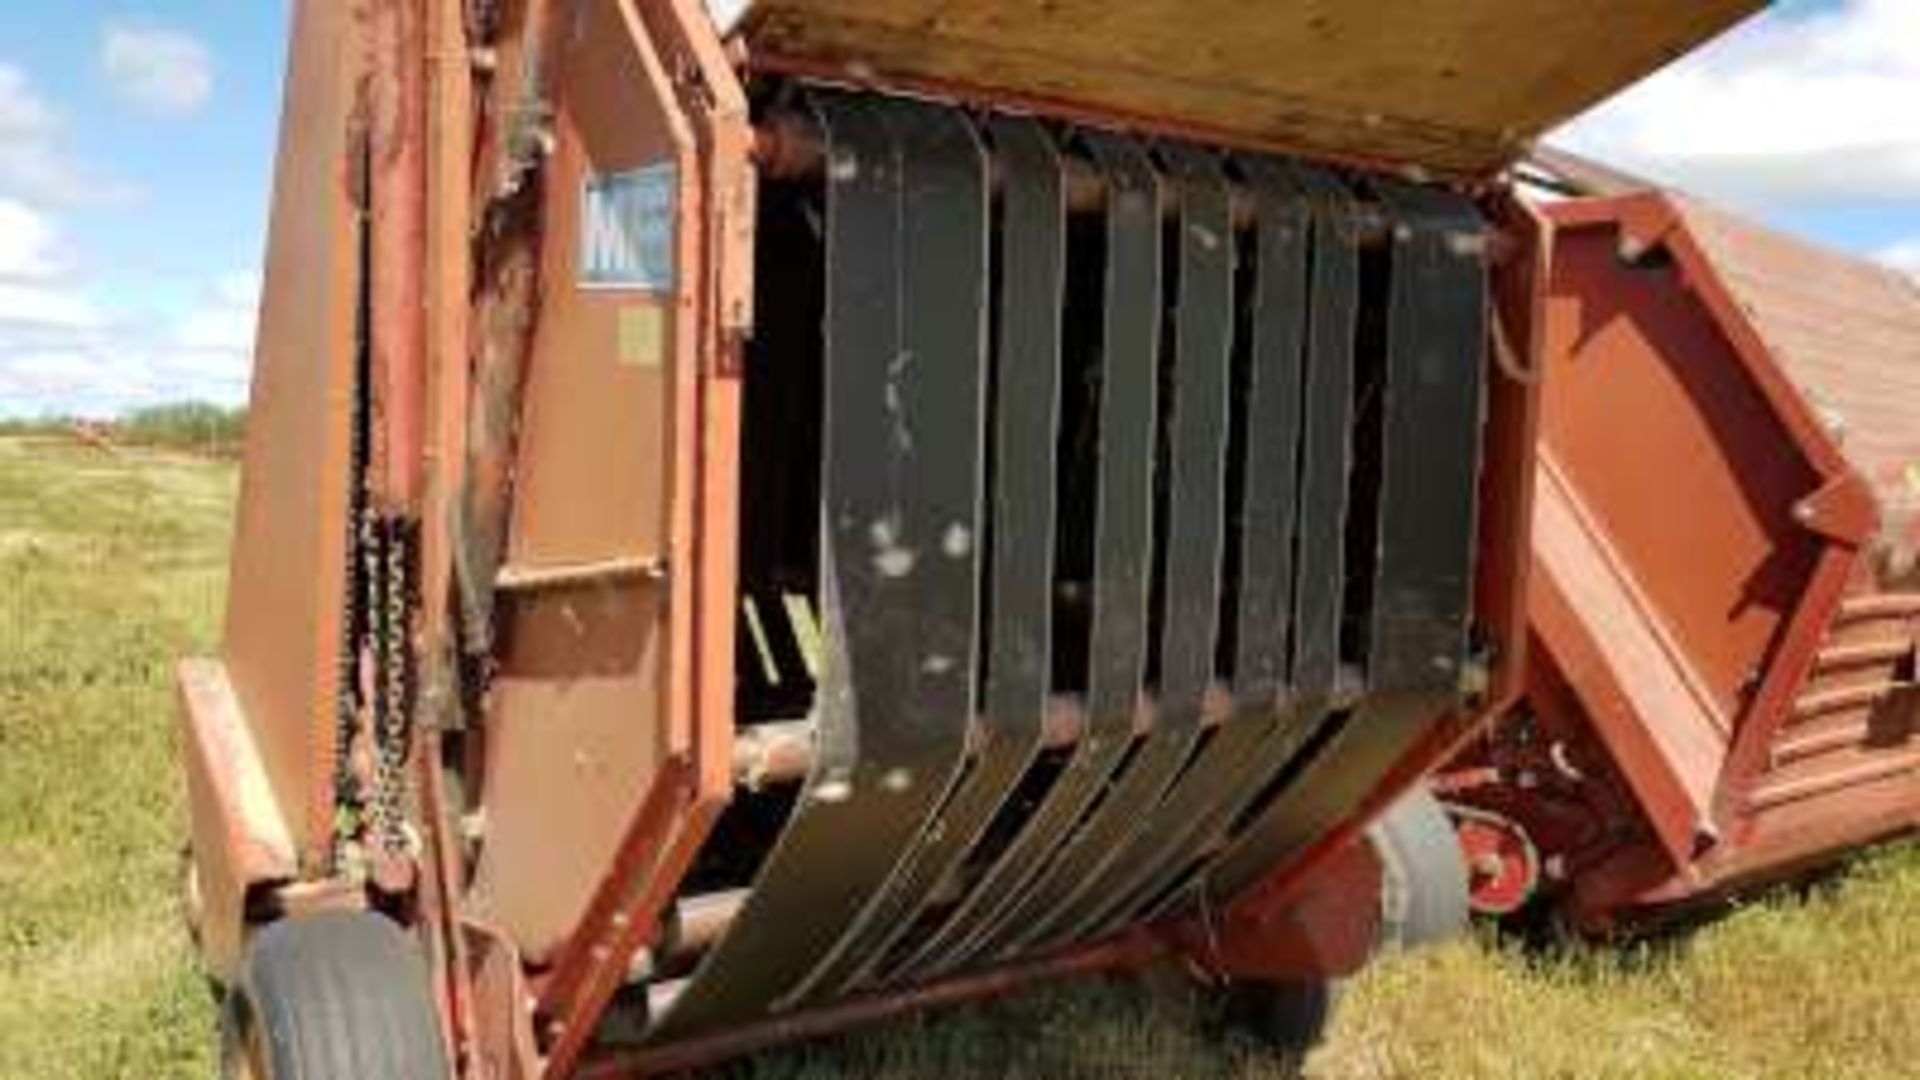 MF 560 Round Baler, homemade protective shell covers the belts in storage. - Image 3 of 3